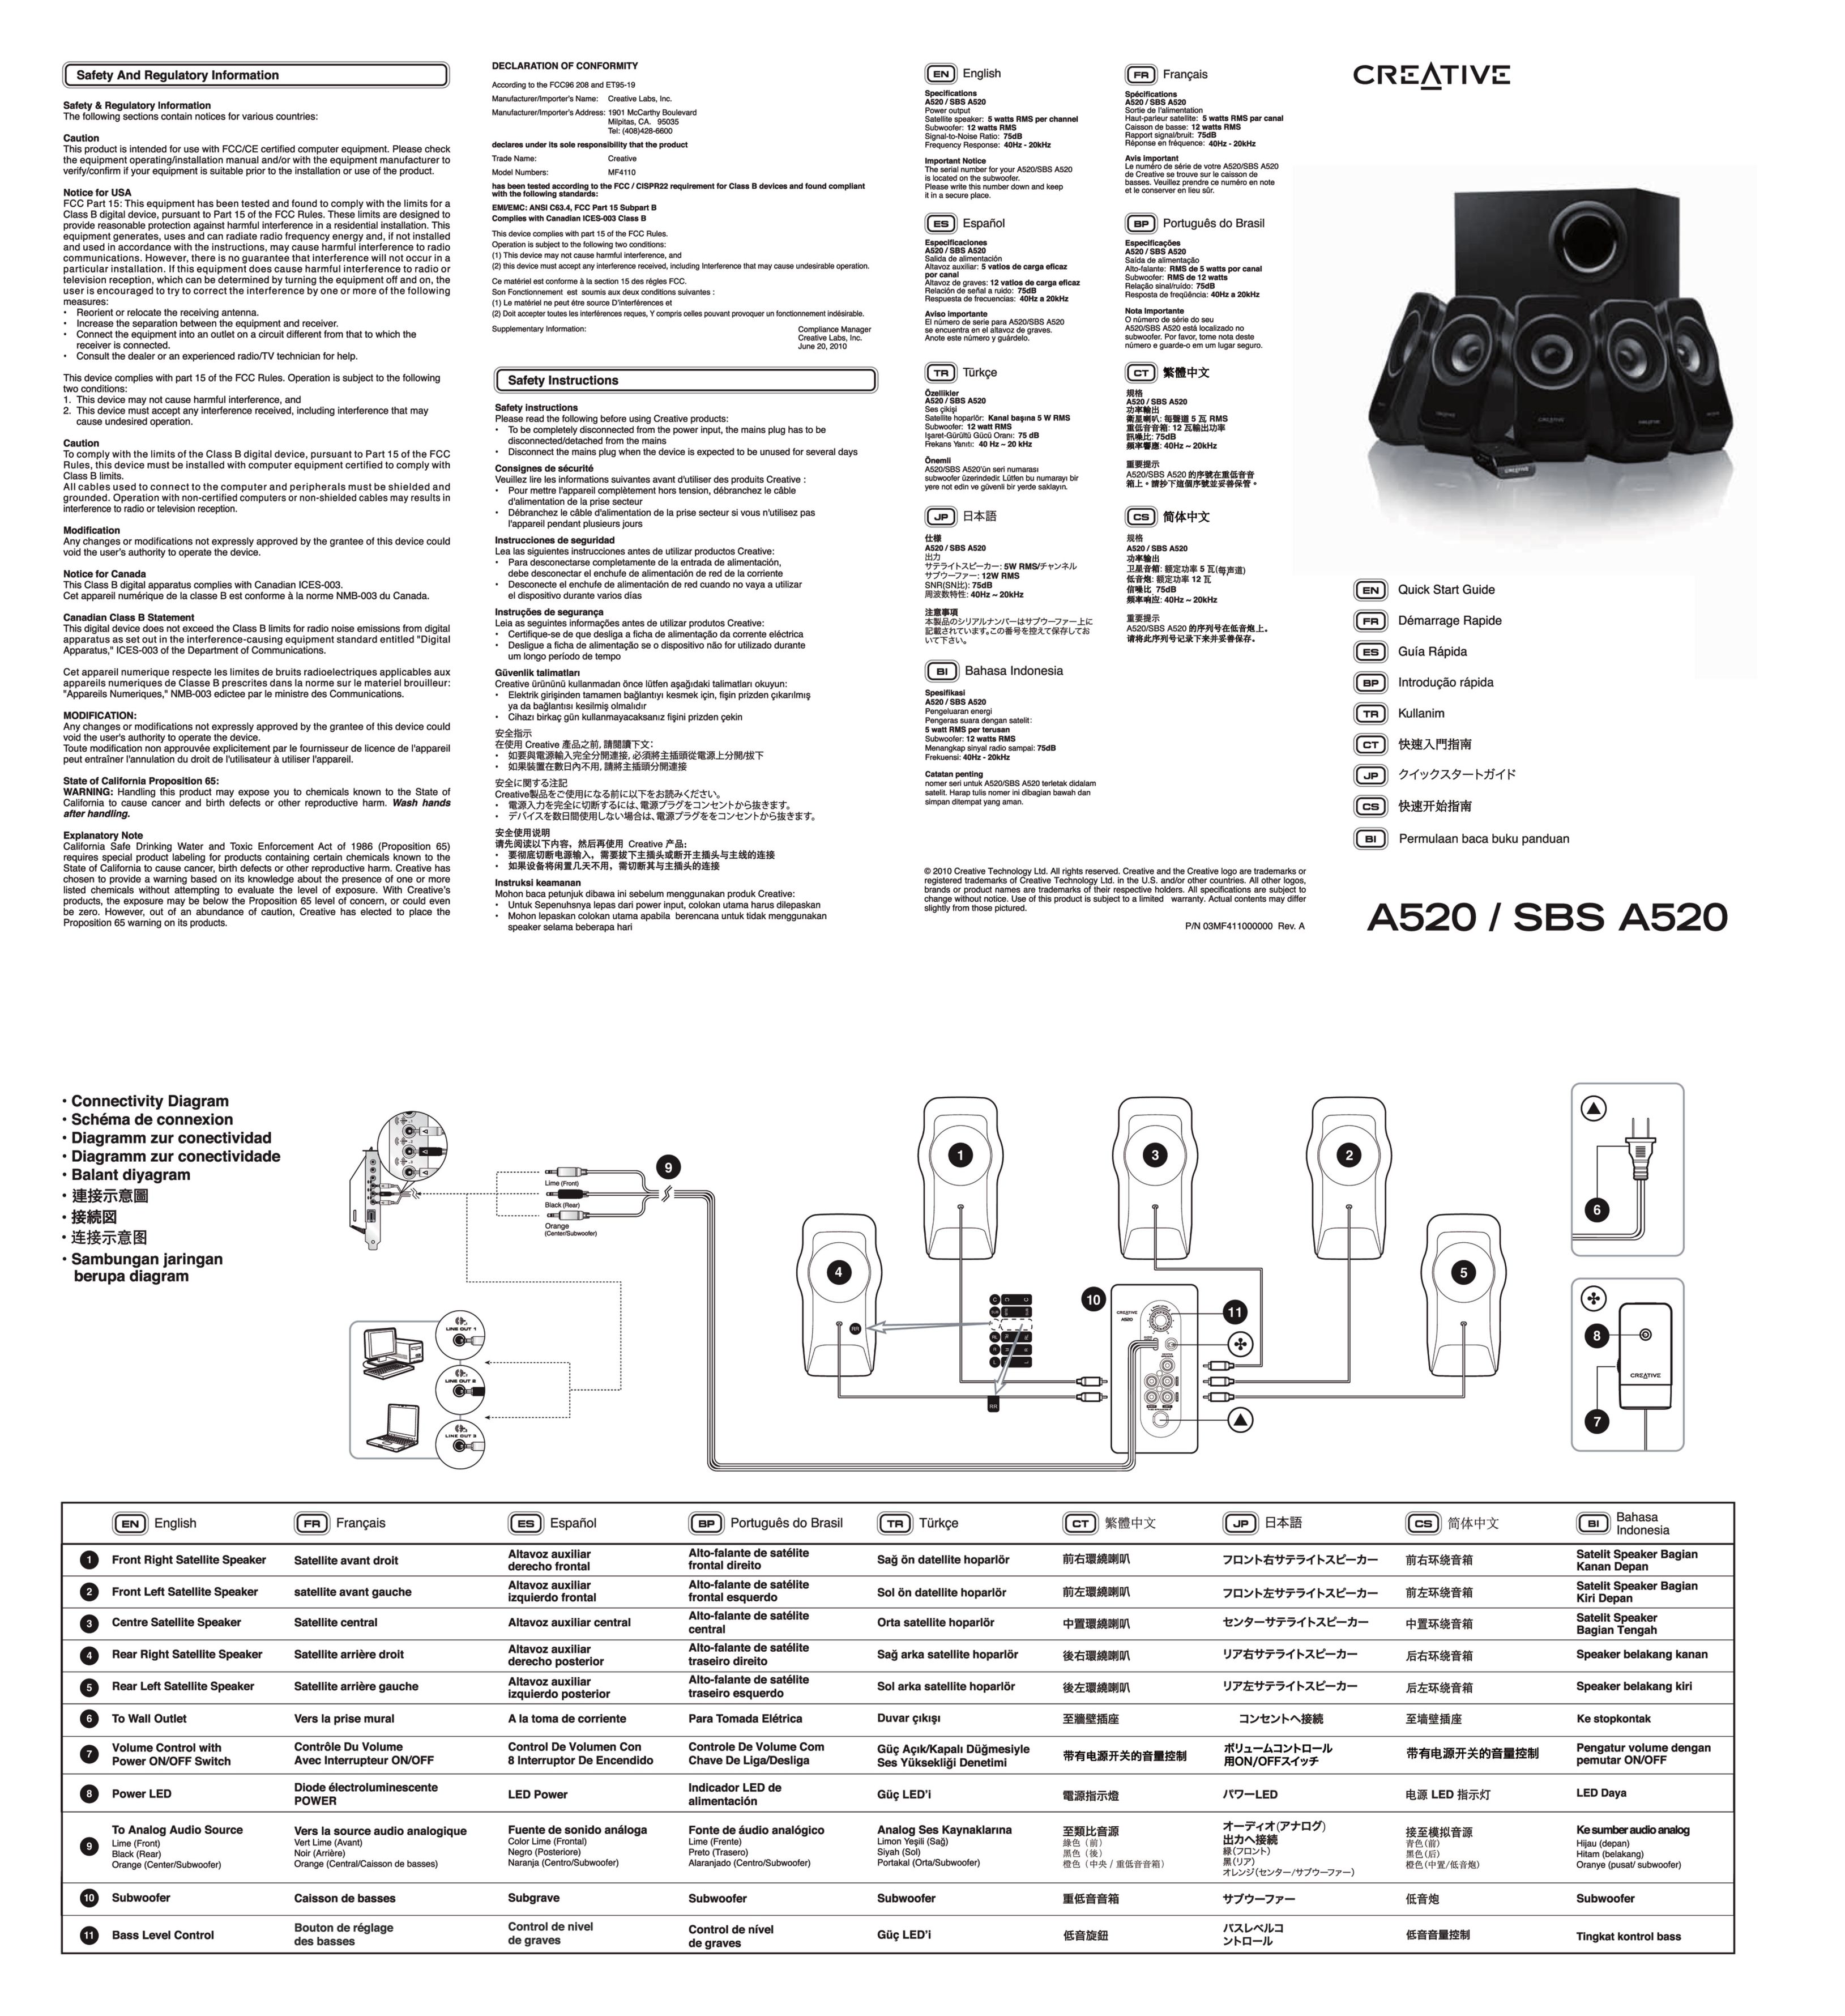 Creative Labs A520 Home Theater System User Manual